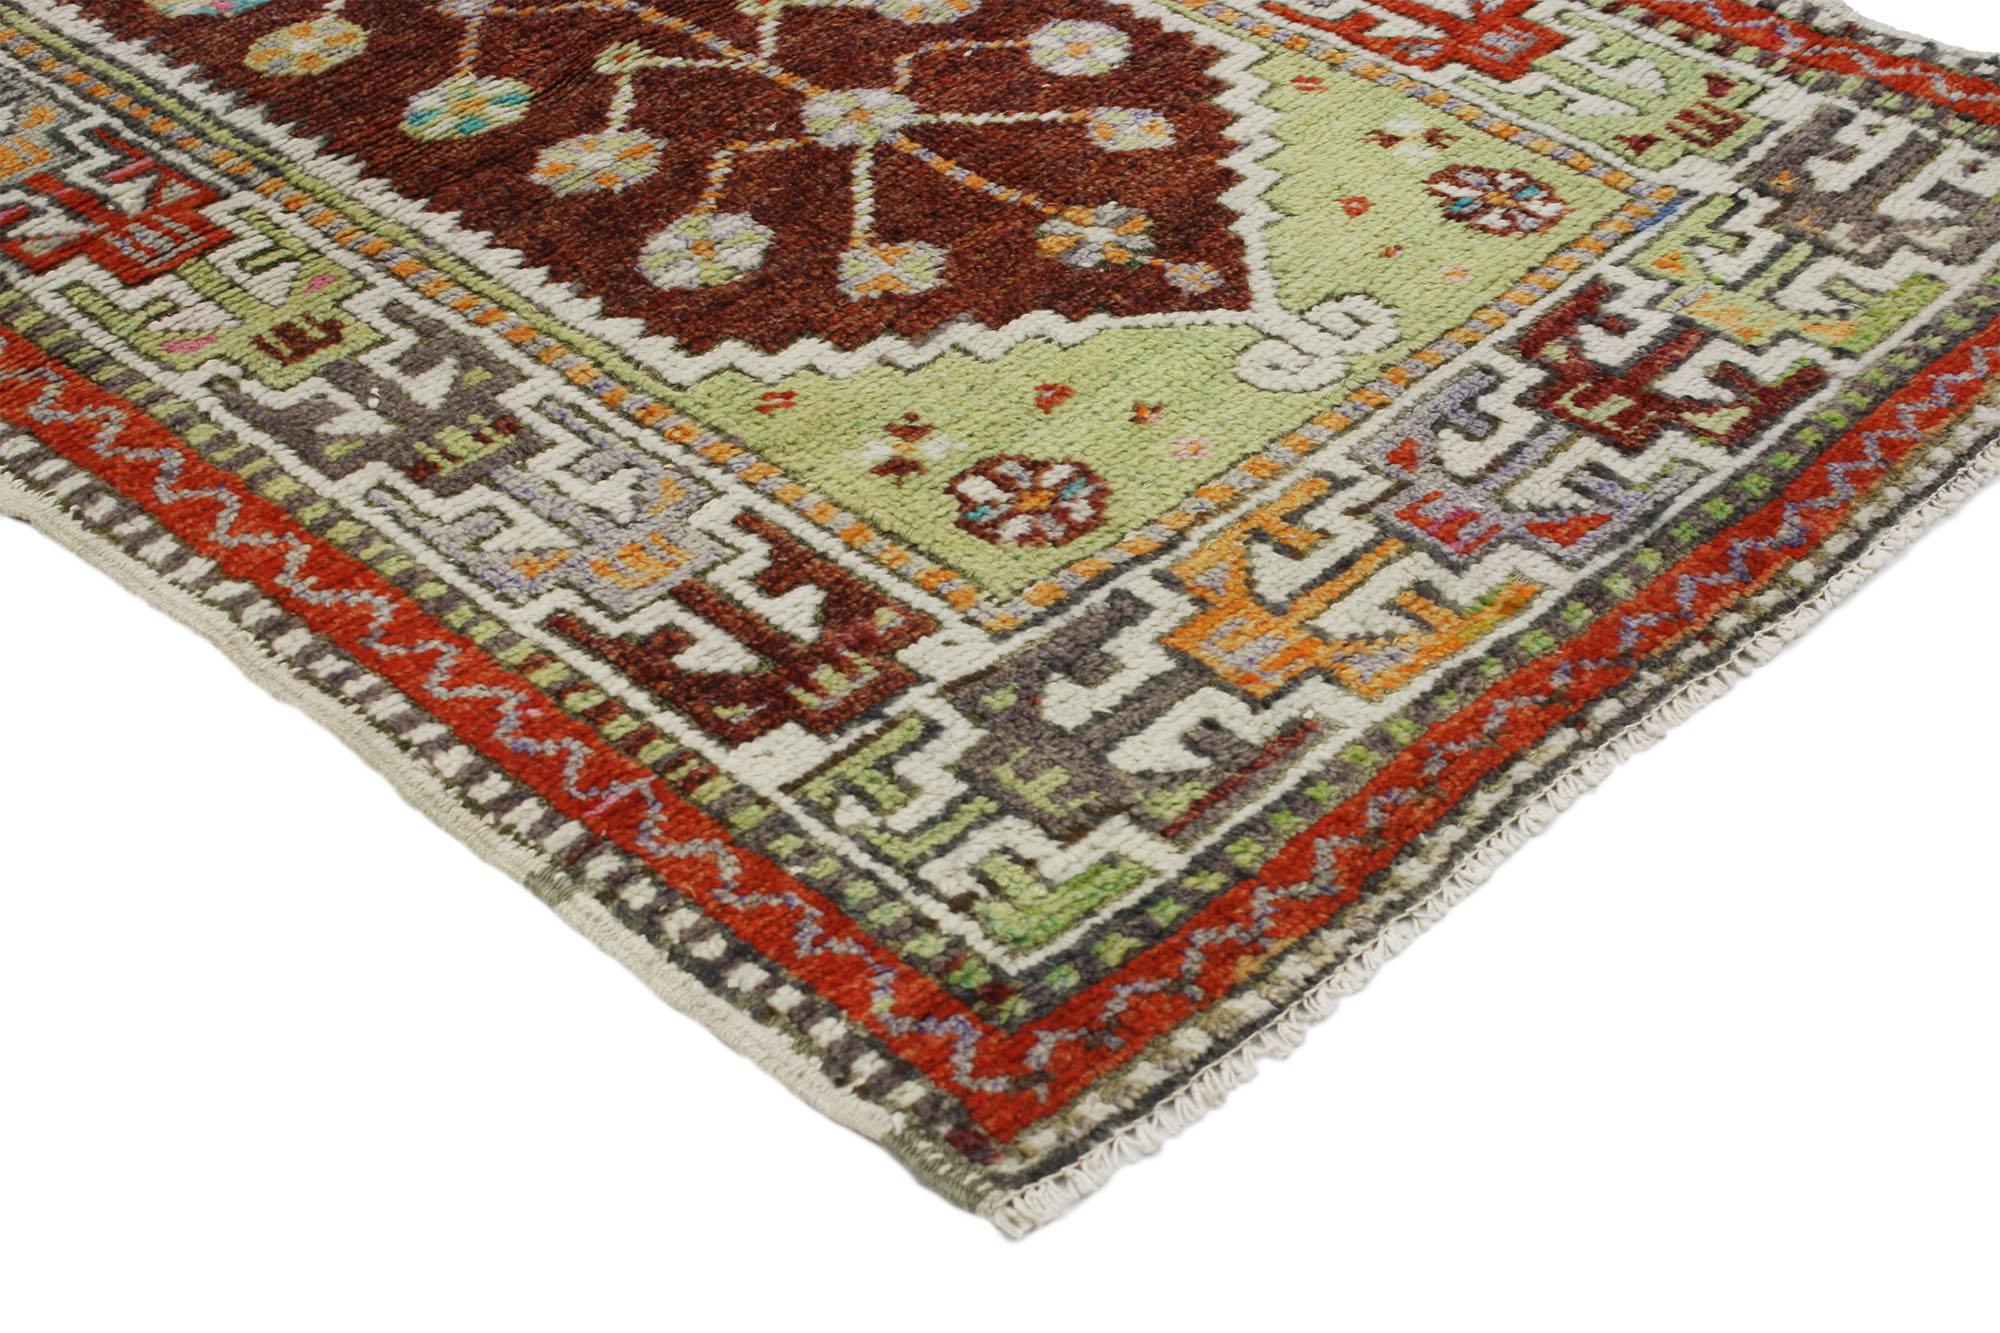 51761 Vintage Turkish Oushak Rug, 02'05 x 04'03.
Colorfully curated meets whimsical boho in this colorful Oushak rug. The eye-catching tribal design and lively colors woven into this piece work together creating a bold, exotic look. The composition